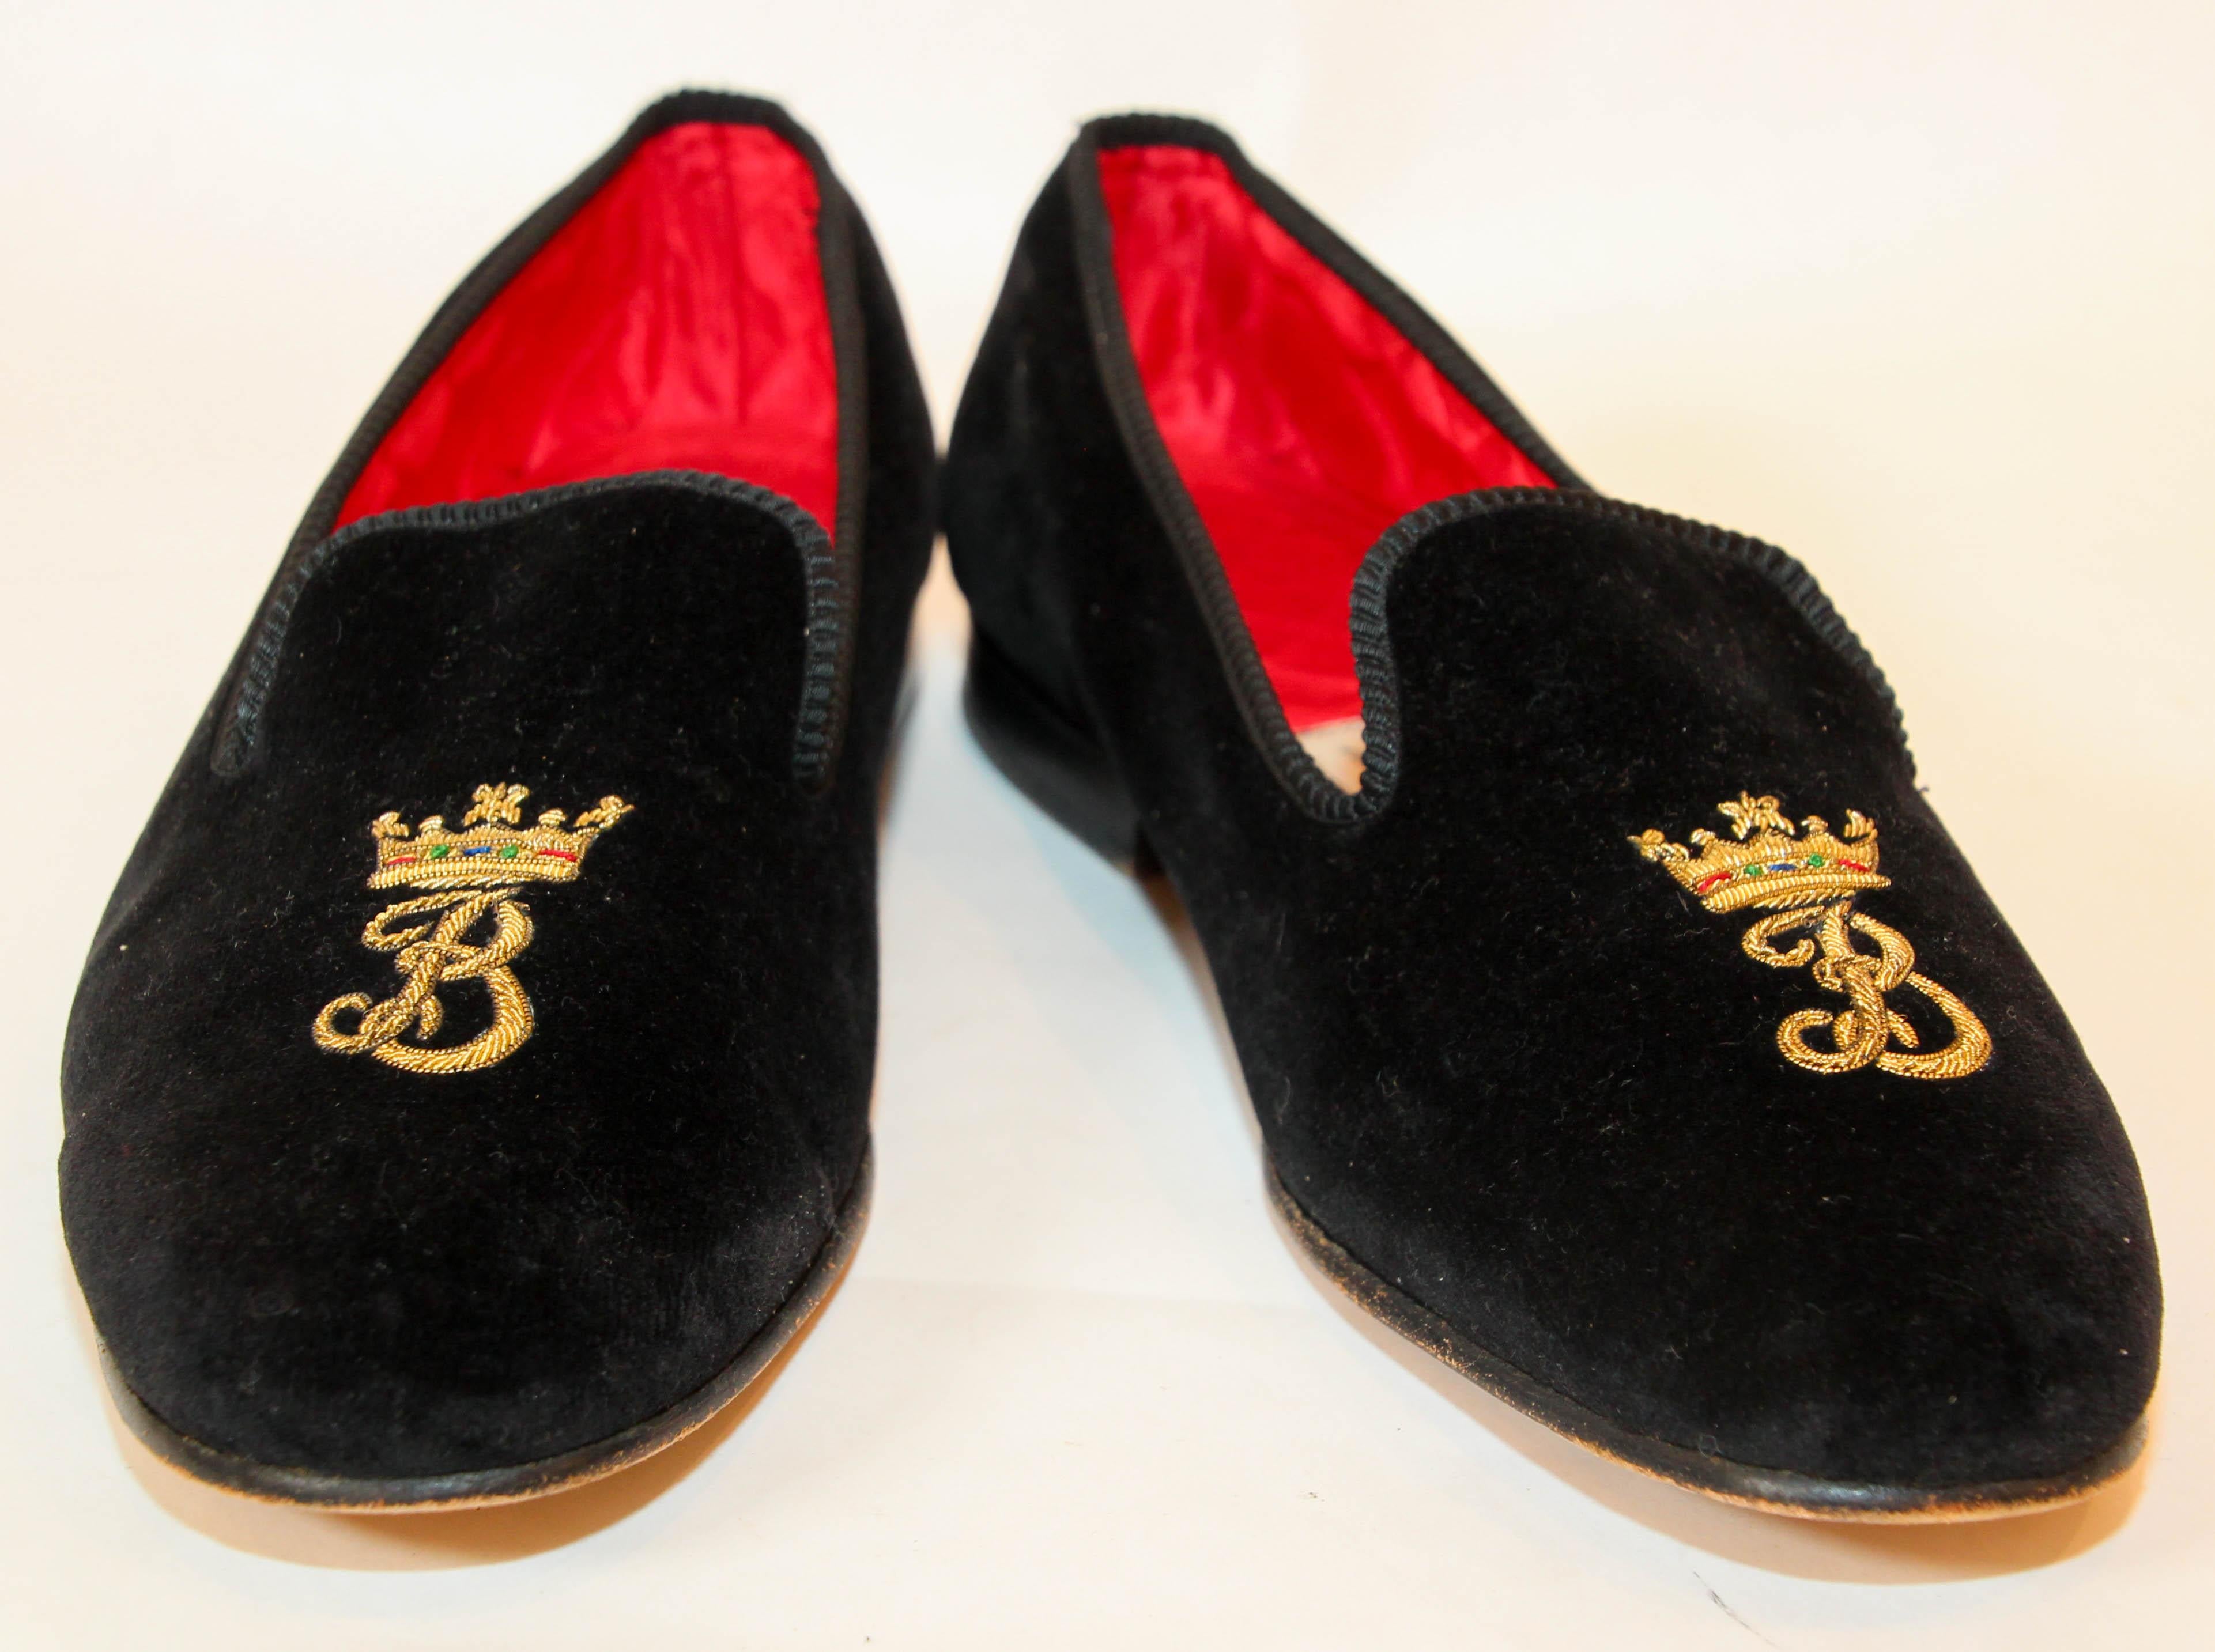 Berk of London Velvet Slippers Size 9.
by Berk of Burlington Arcade, London
Men luxury hand-made, leather-soled velvet loafers, aristocratically hand embroidered with gold bullion thread and monogrammed with the letter 